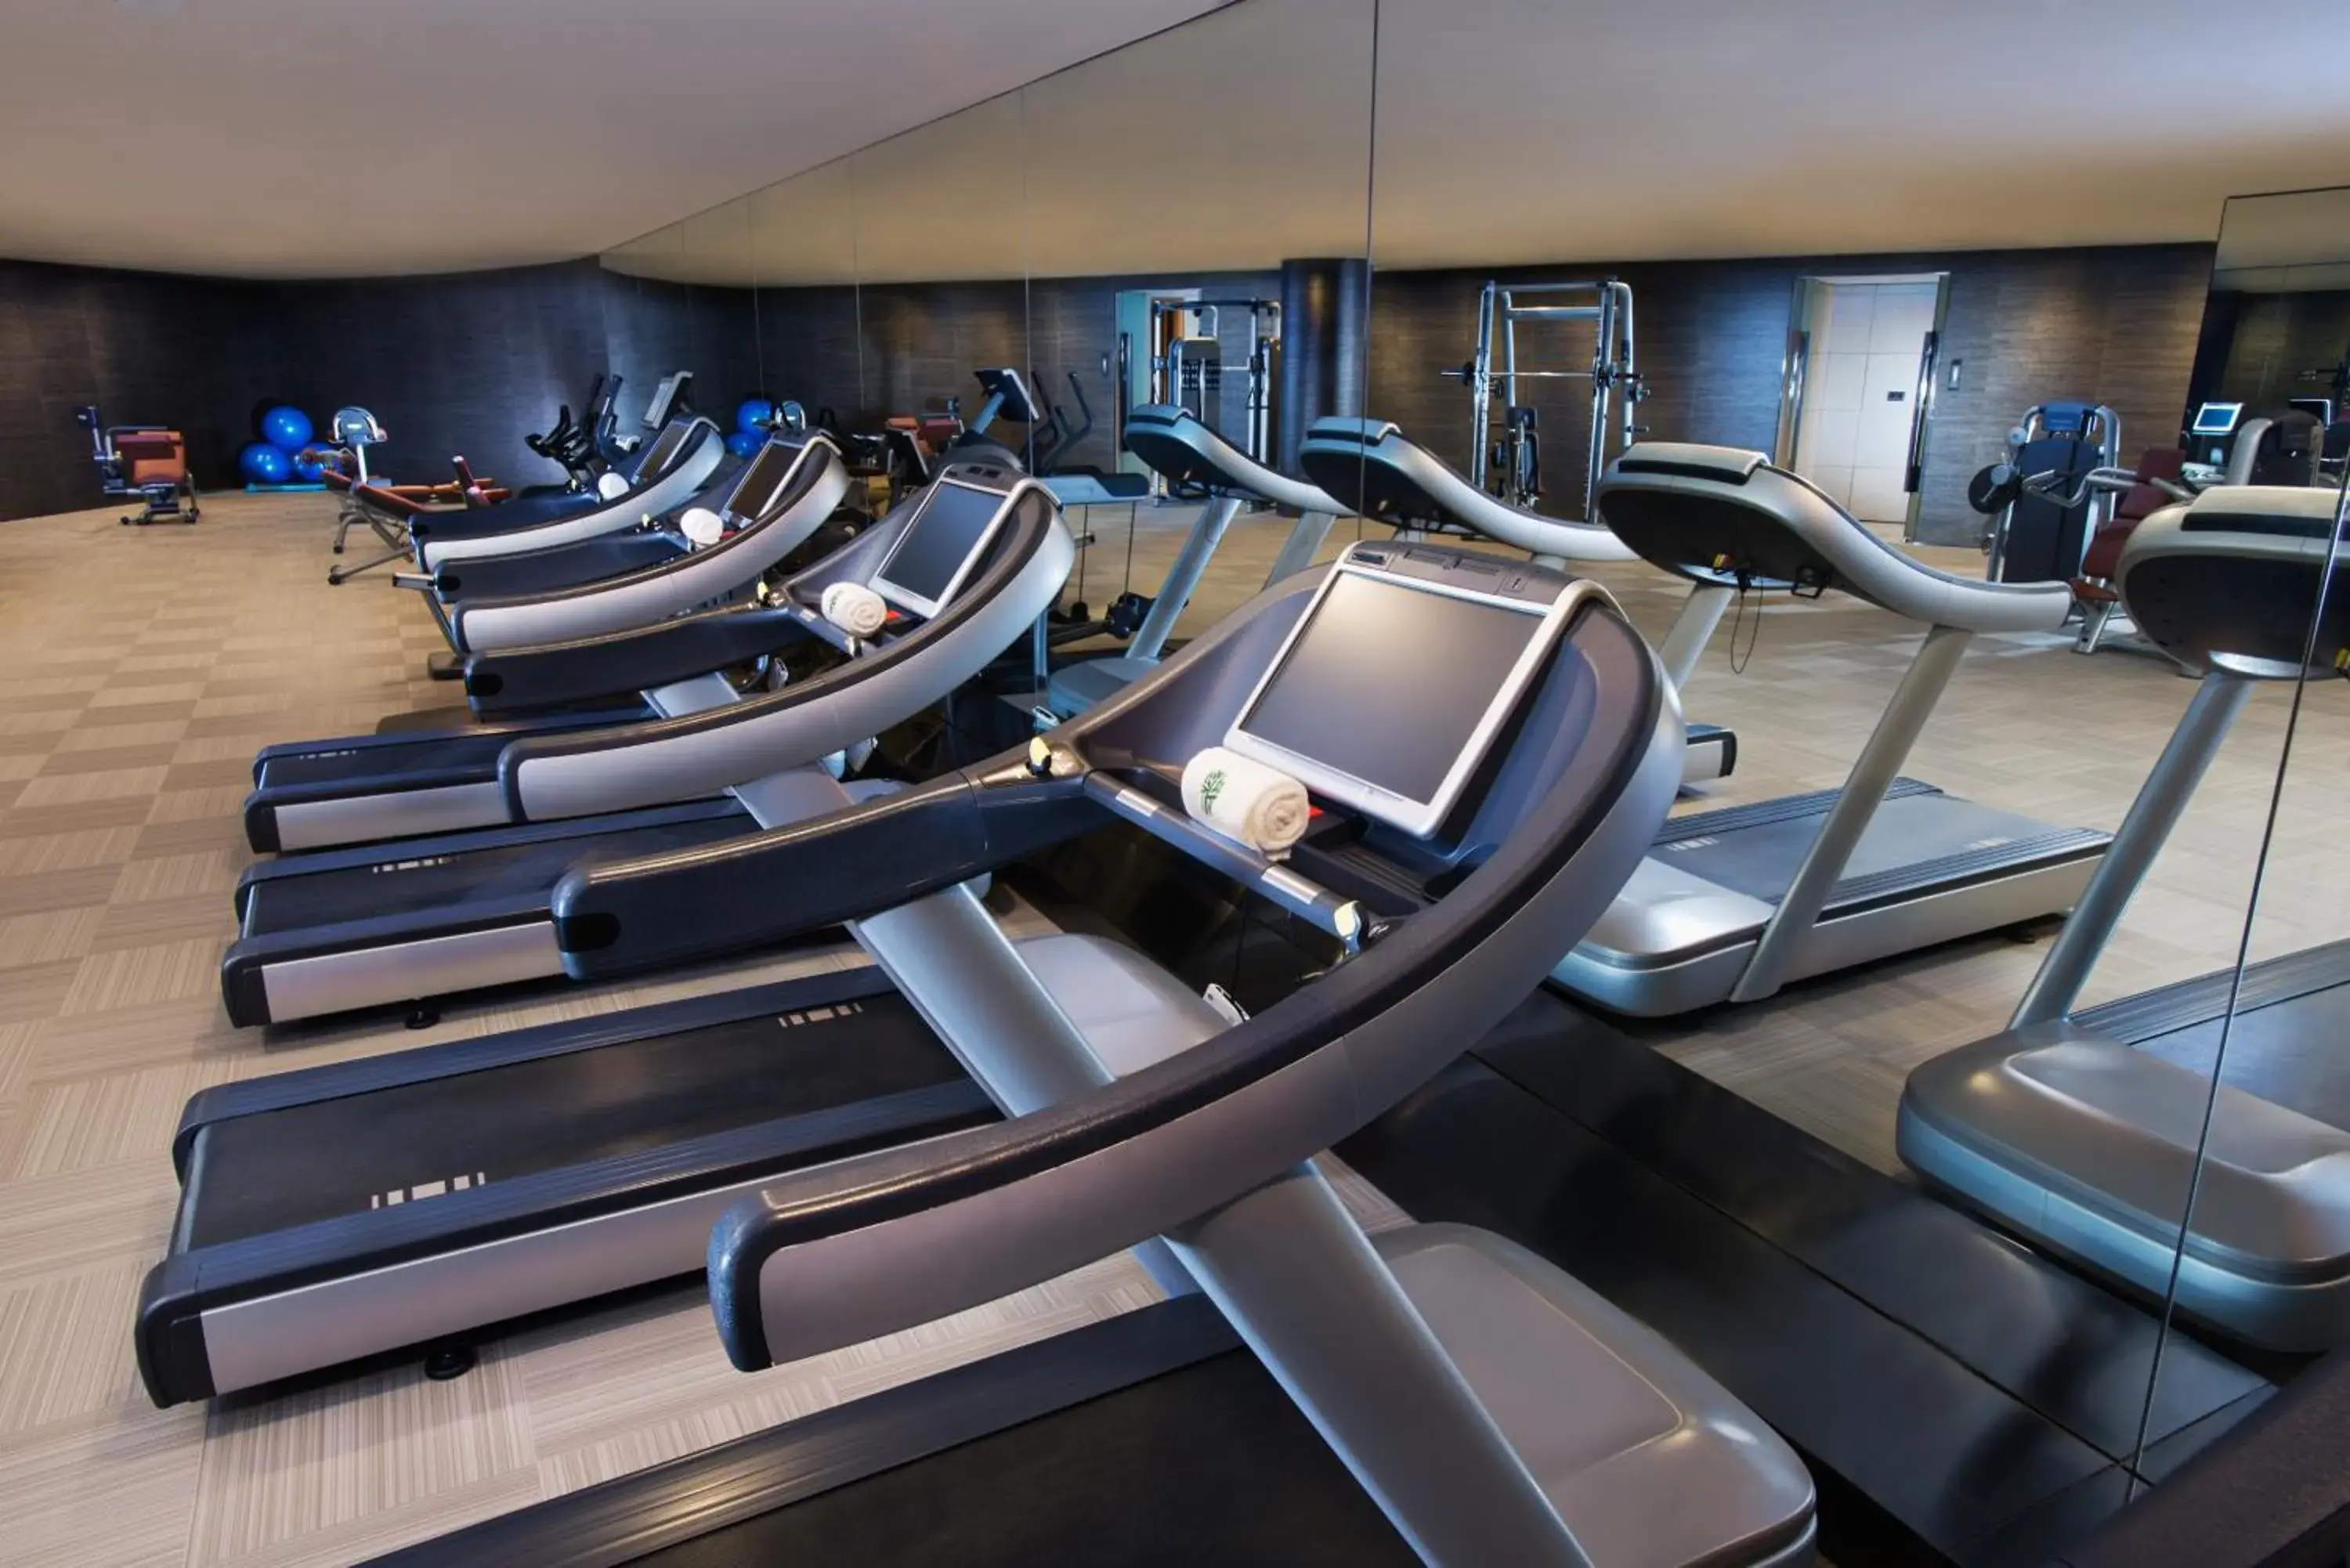 Fitness centre/facilities, Fitness Center/Facilities in Banyan Tree Shanghai On The Bund